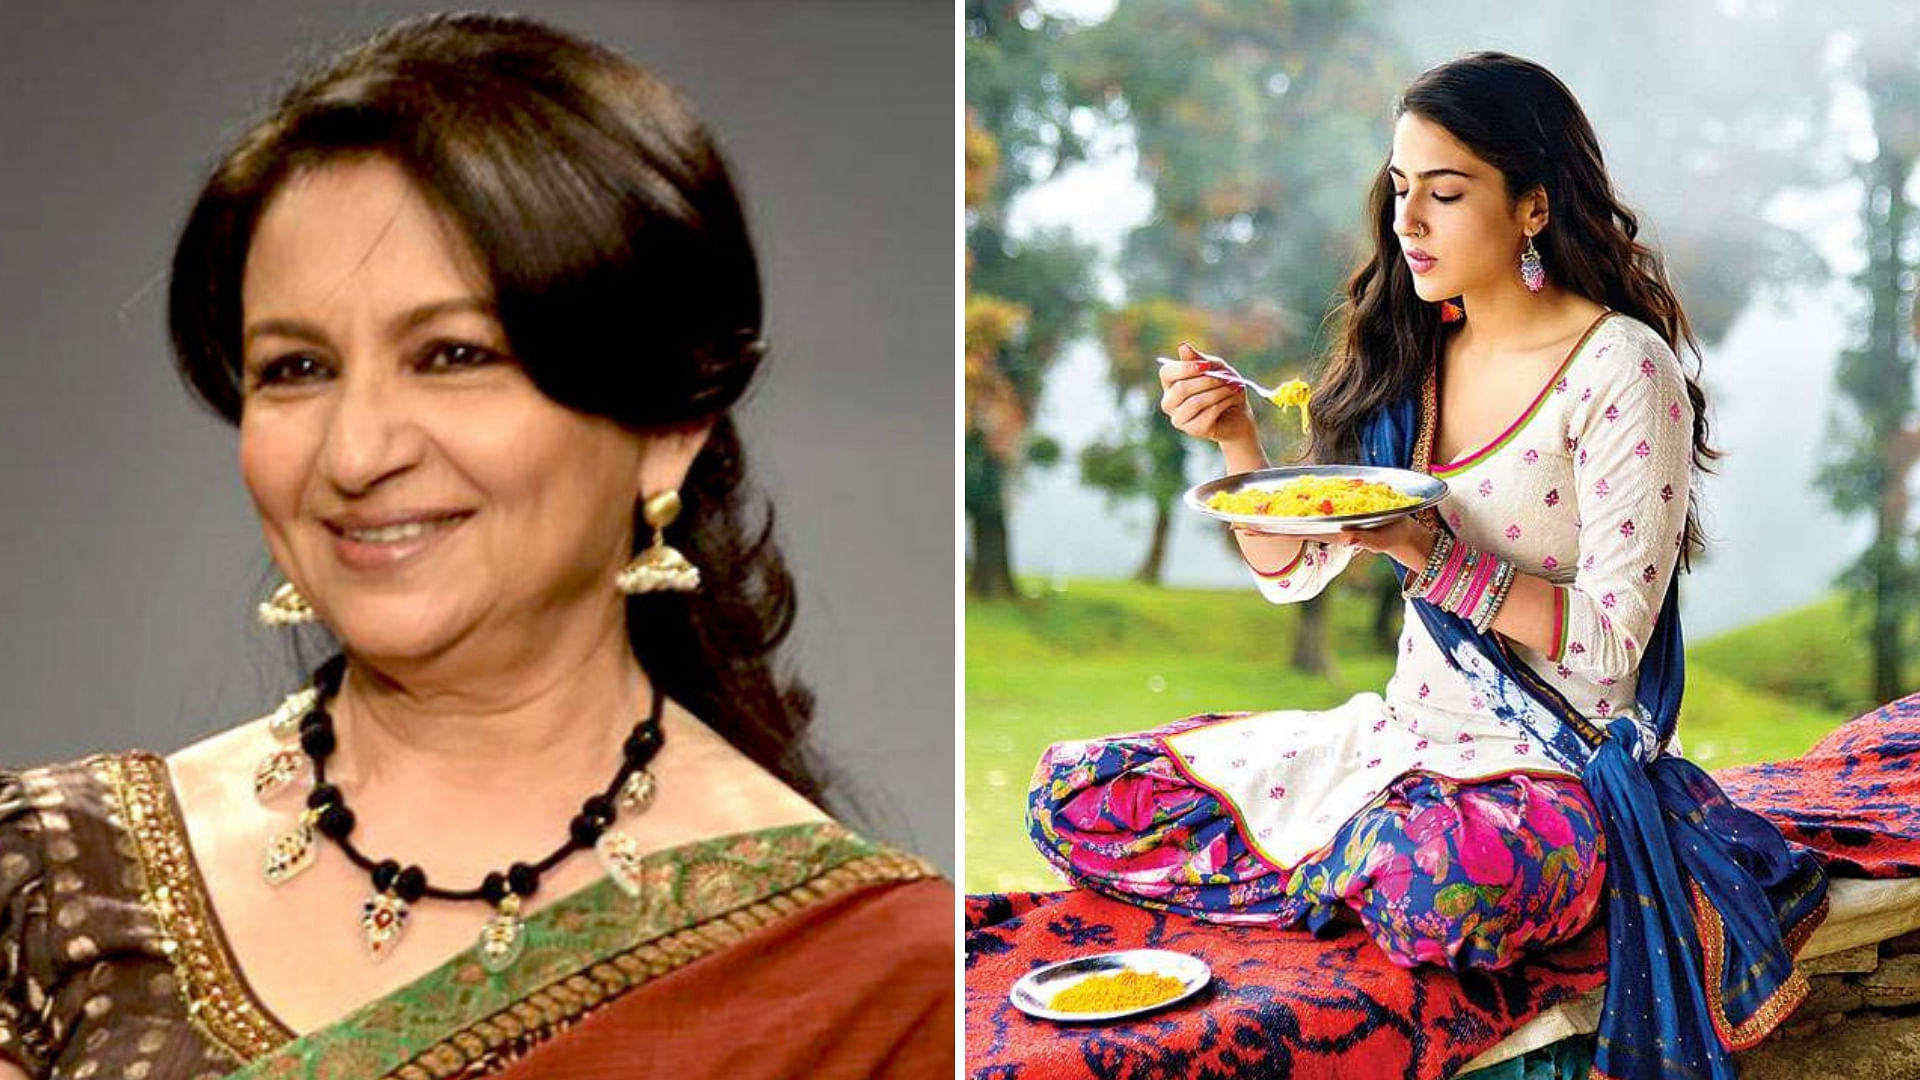 Sharmila Tagore, who will turn 74 on Saturday, says that Sara Ali Khan’s confidence, humility and charm makes her very happy